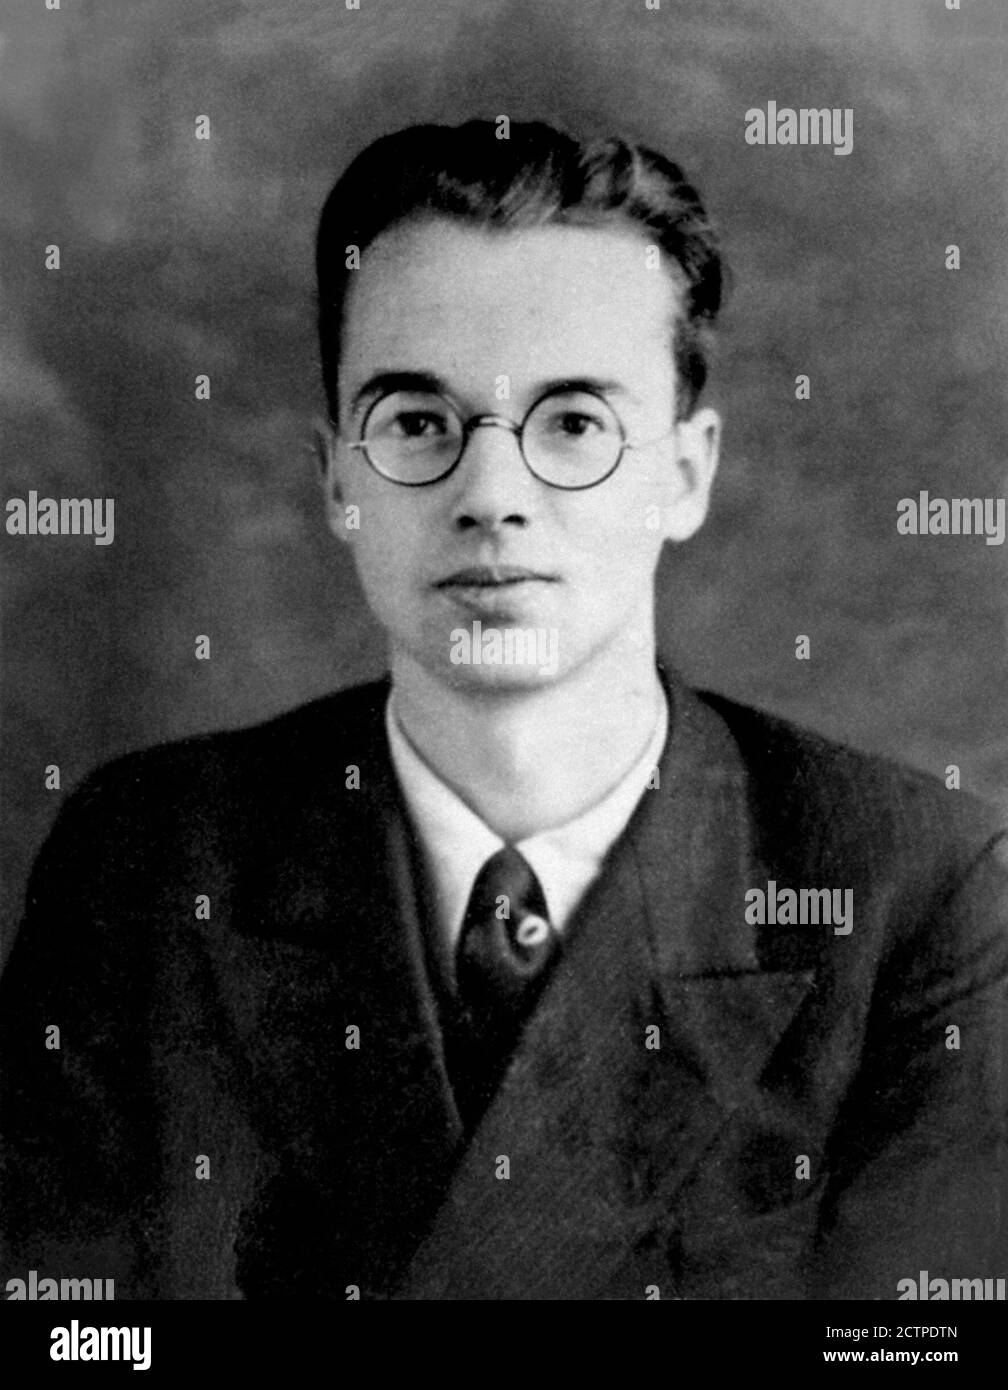 Klaus Fuchs. Police photograph of the German theoretical physicist, Klaus Emil Julius Fuchs (1911-1988), c. 1940. Fuchs was a Soviet spy who supplied information from the Manhattan Project to the USSR Stock Photo